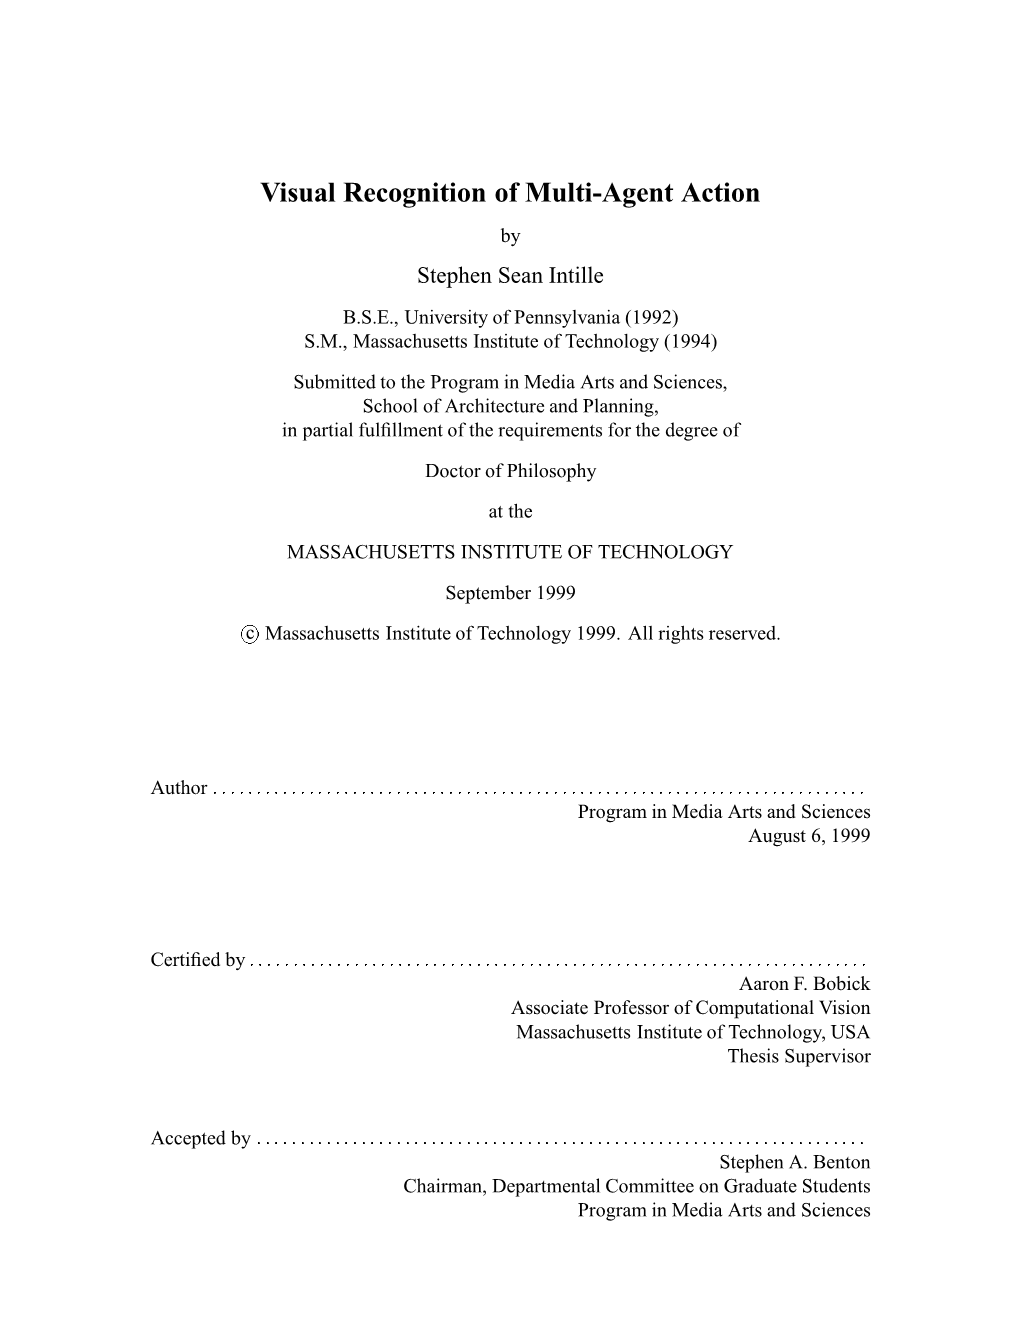 Visual Recognition of Multi-Agent Action by Stephen Sean Intille